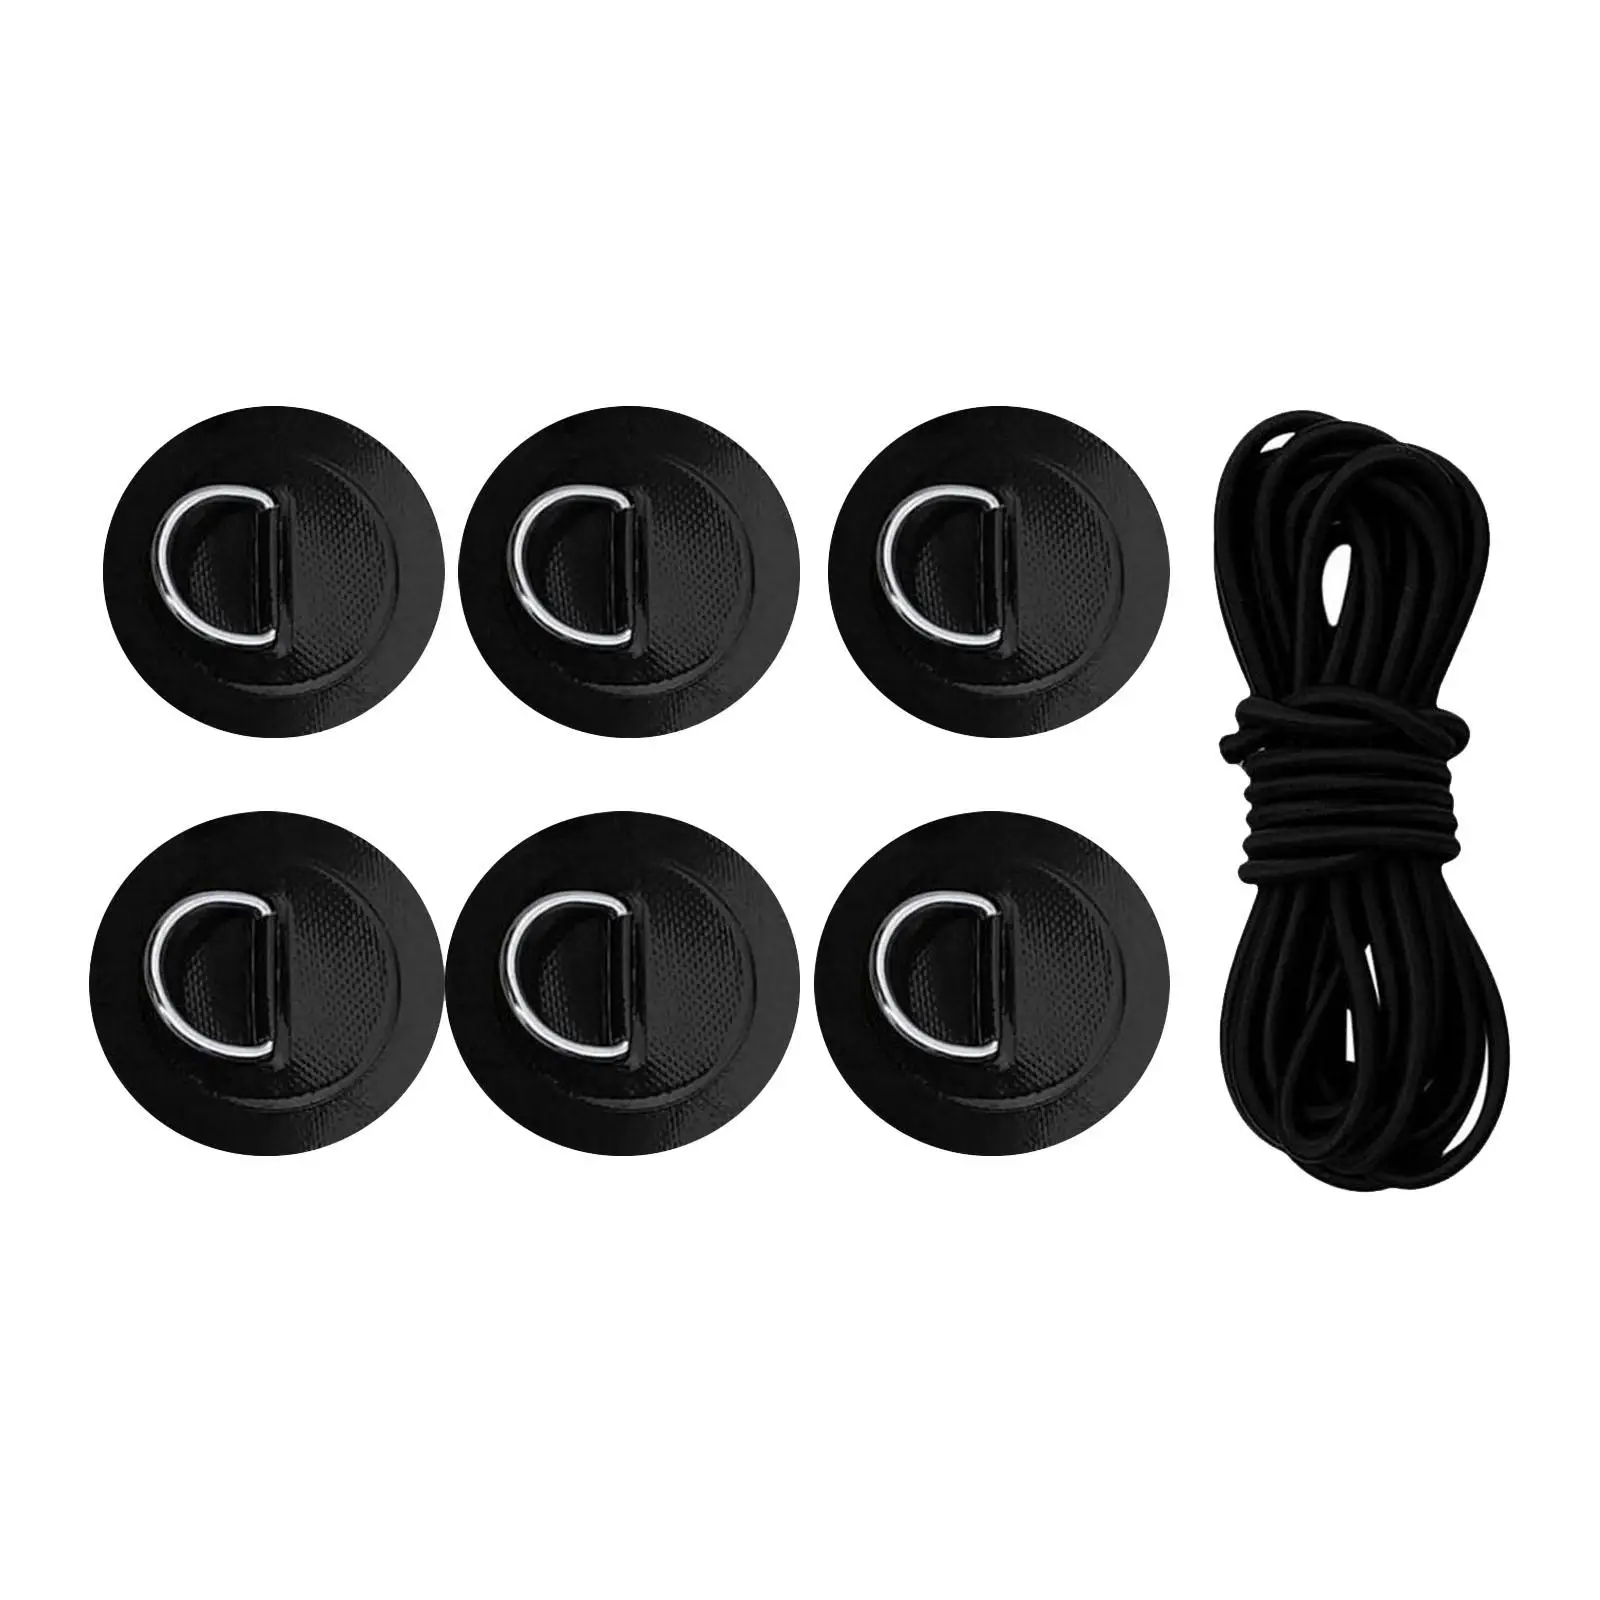 6 Pieces D Rings PVC Patch Deck Rigging Kit for Inflatable Boat Kayak Dinghy